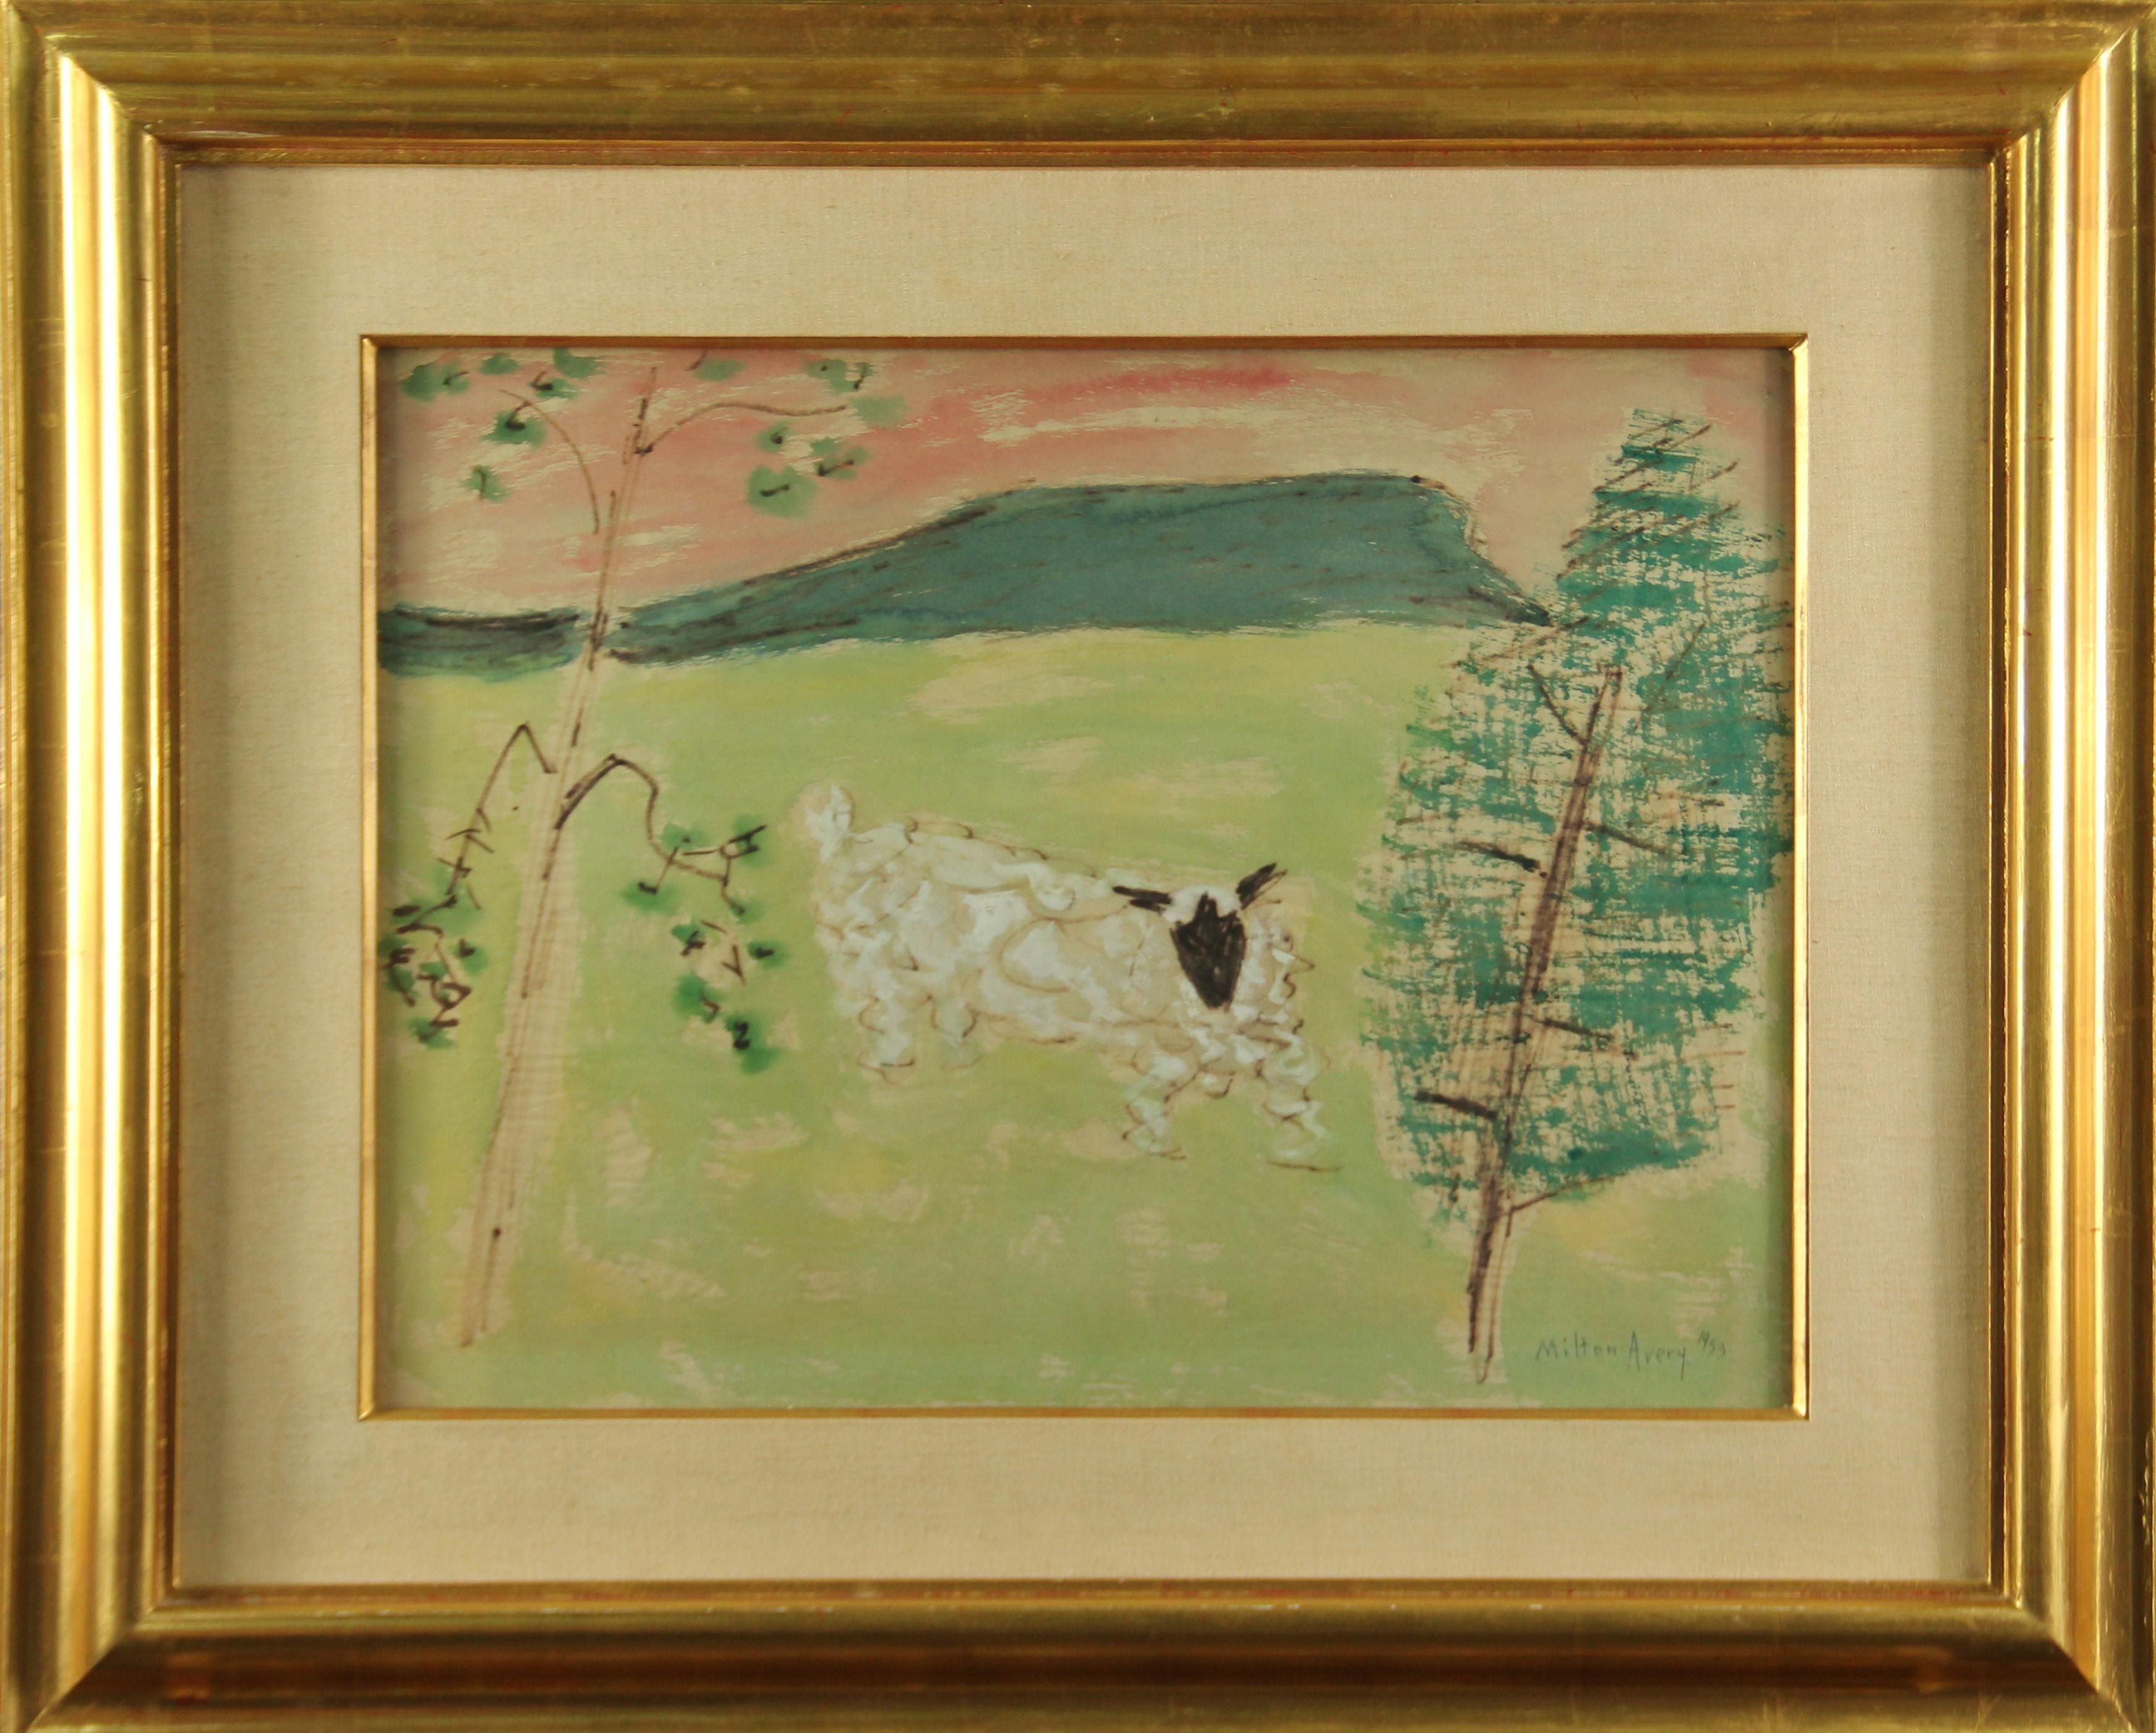 Sheep Resting, American Modernist, Landscape, Mixed Media on Paper, Signed, 1953 - Painting by Milton Avery